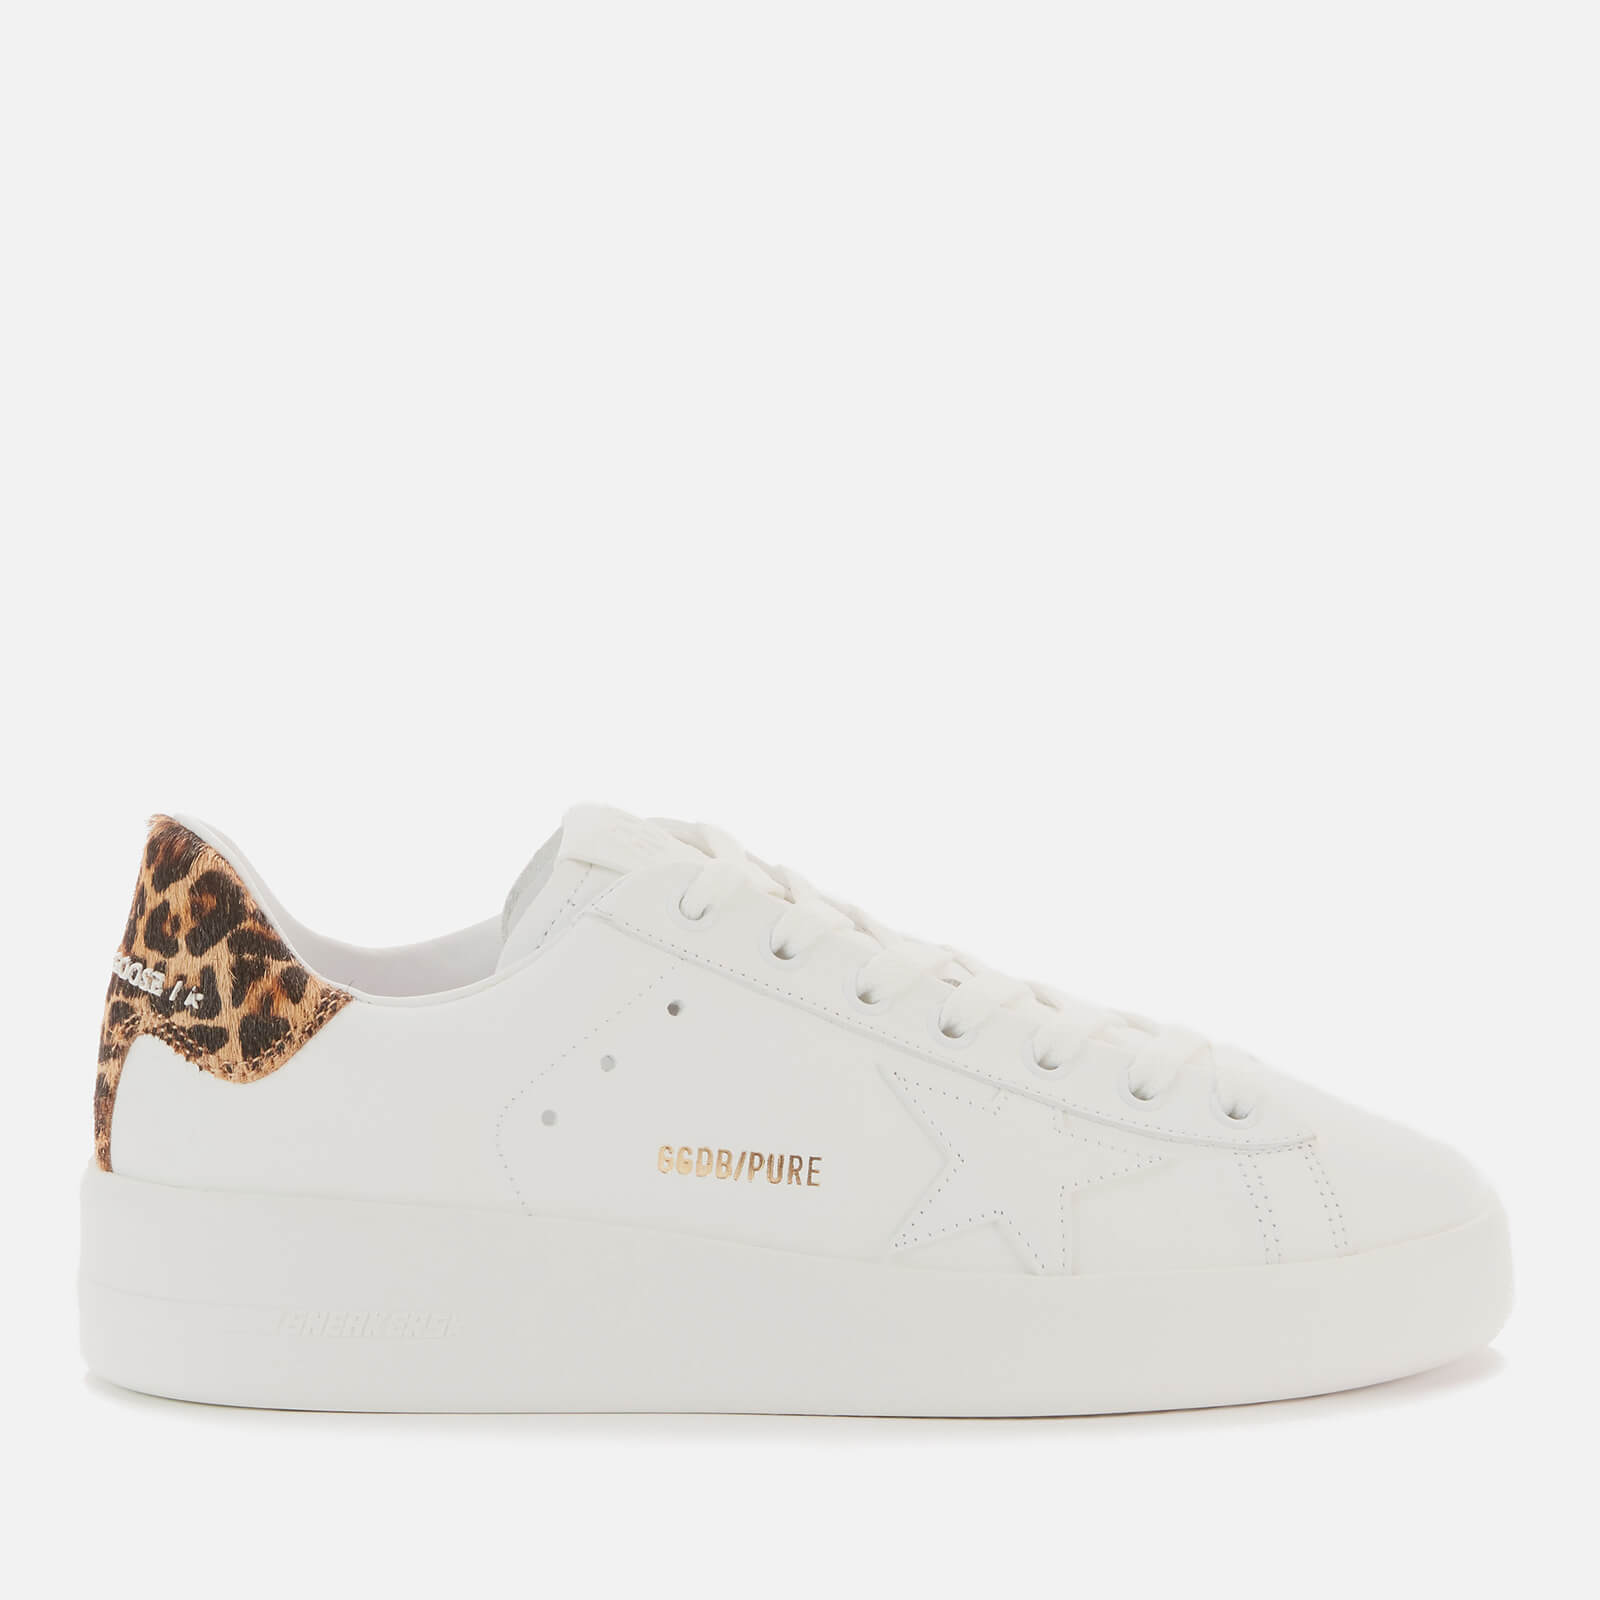 Golden Goose Deluxe Brand Women's Pure Star Leather Trainers - White/Brown/Leopard - UK 4